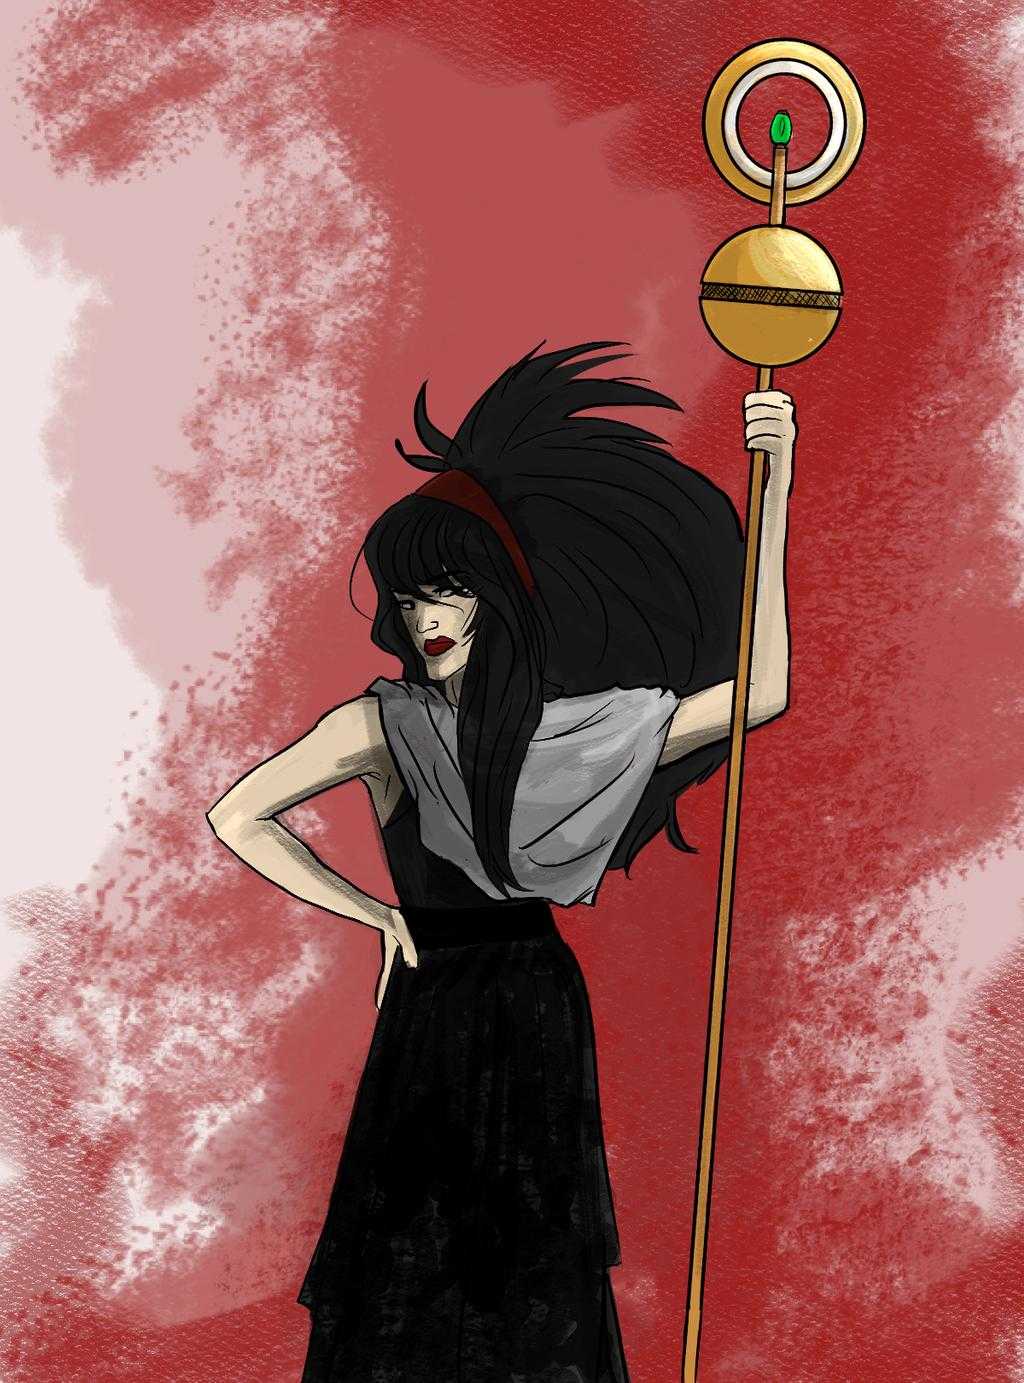 41 Hot Pictures Of Nico Minoru That Will Make You Begin To Look All Starry Eyed At Her 15